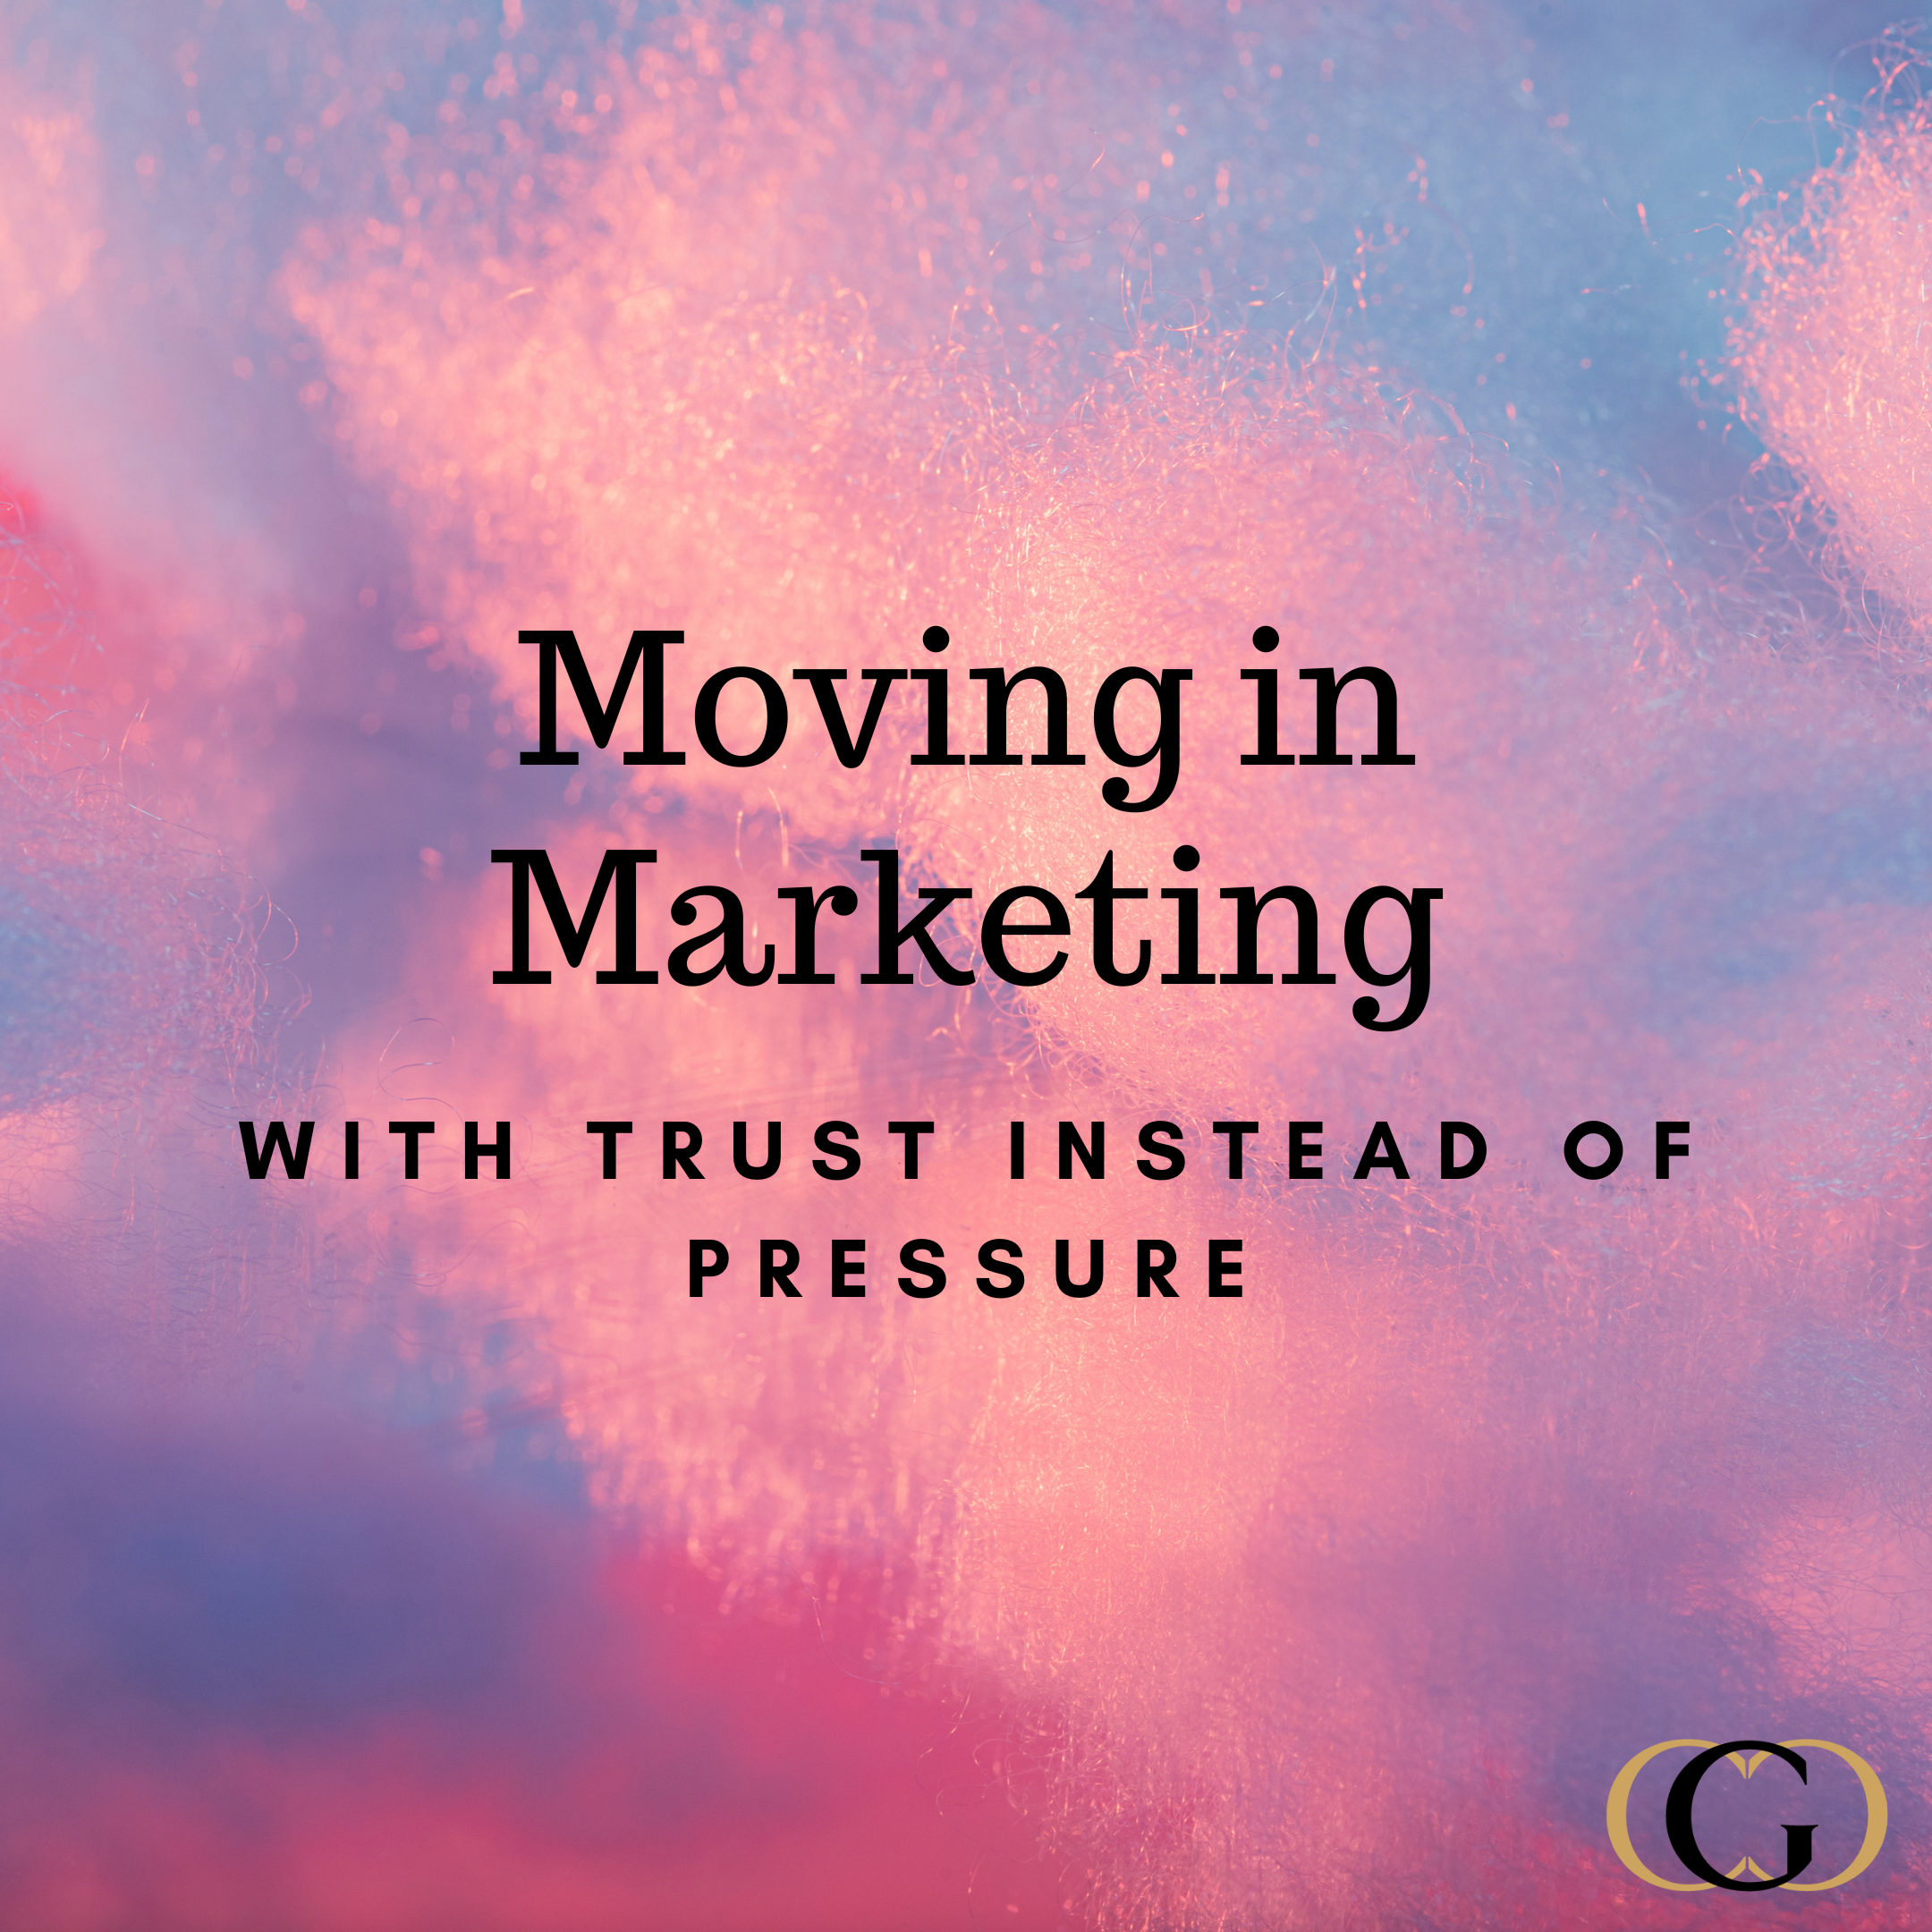 Moving in Marketing with Trust instead of Pressure